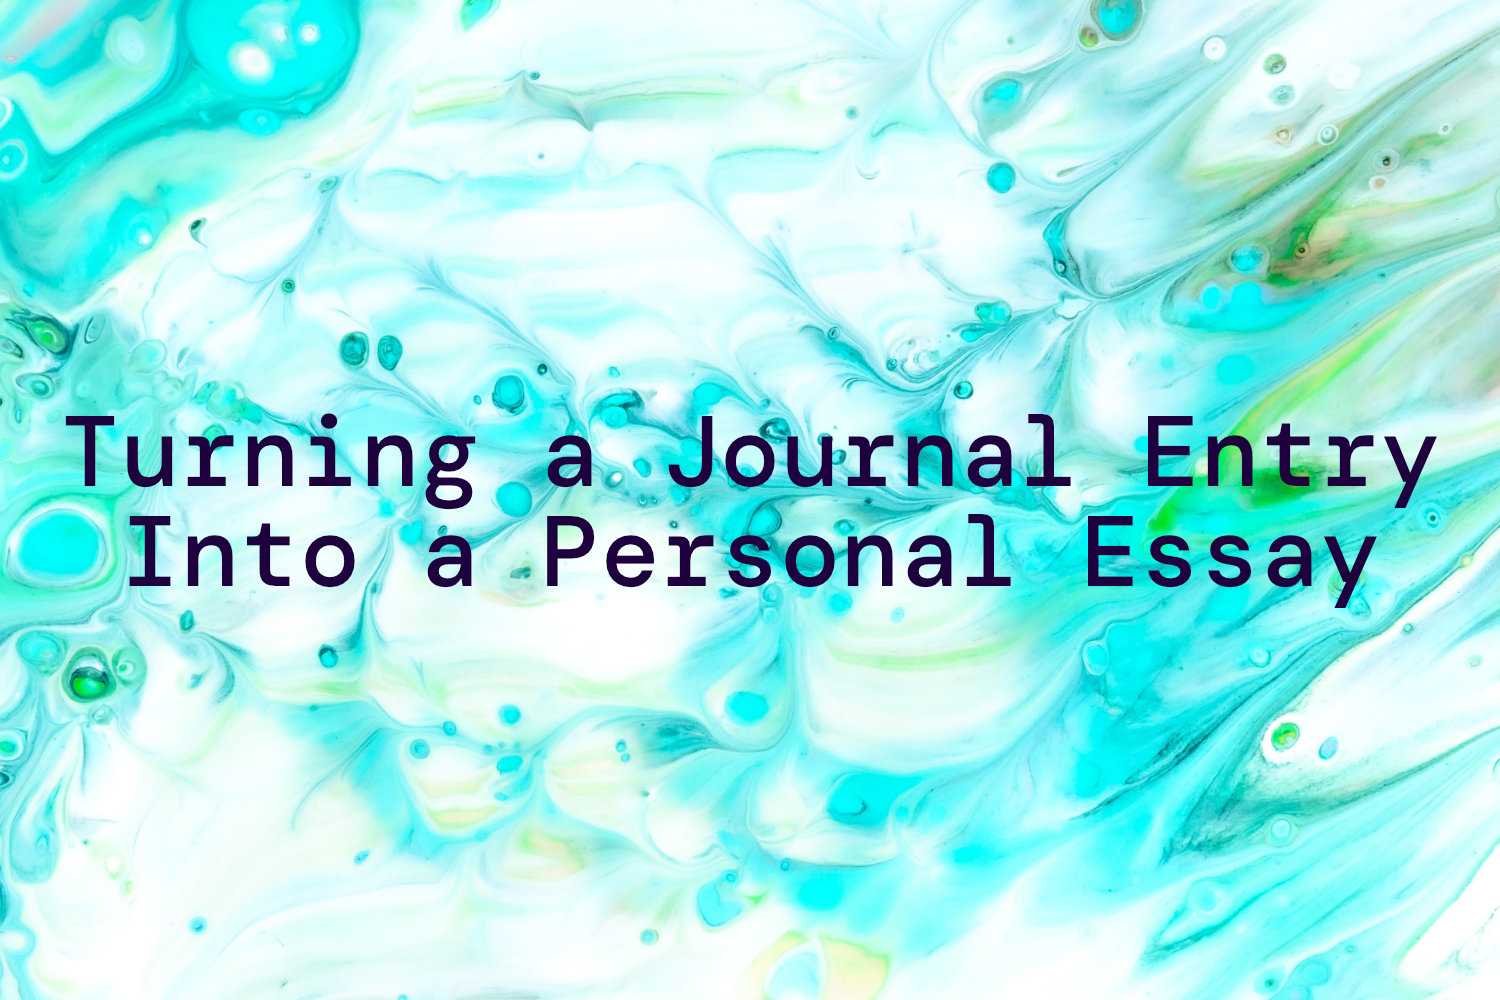 Turning a Journal Entry Into a Personal Essay